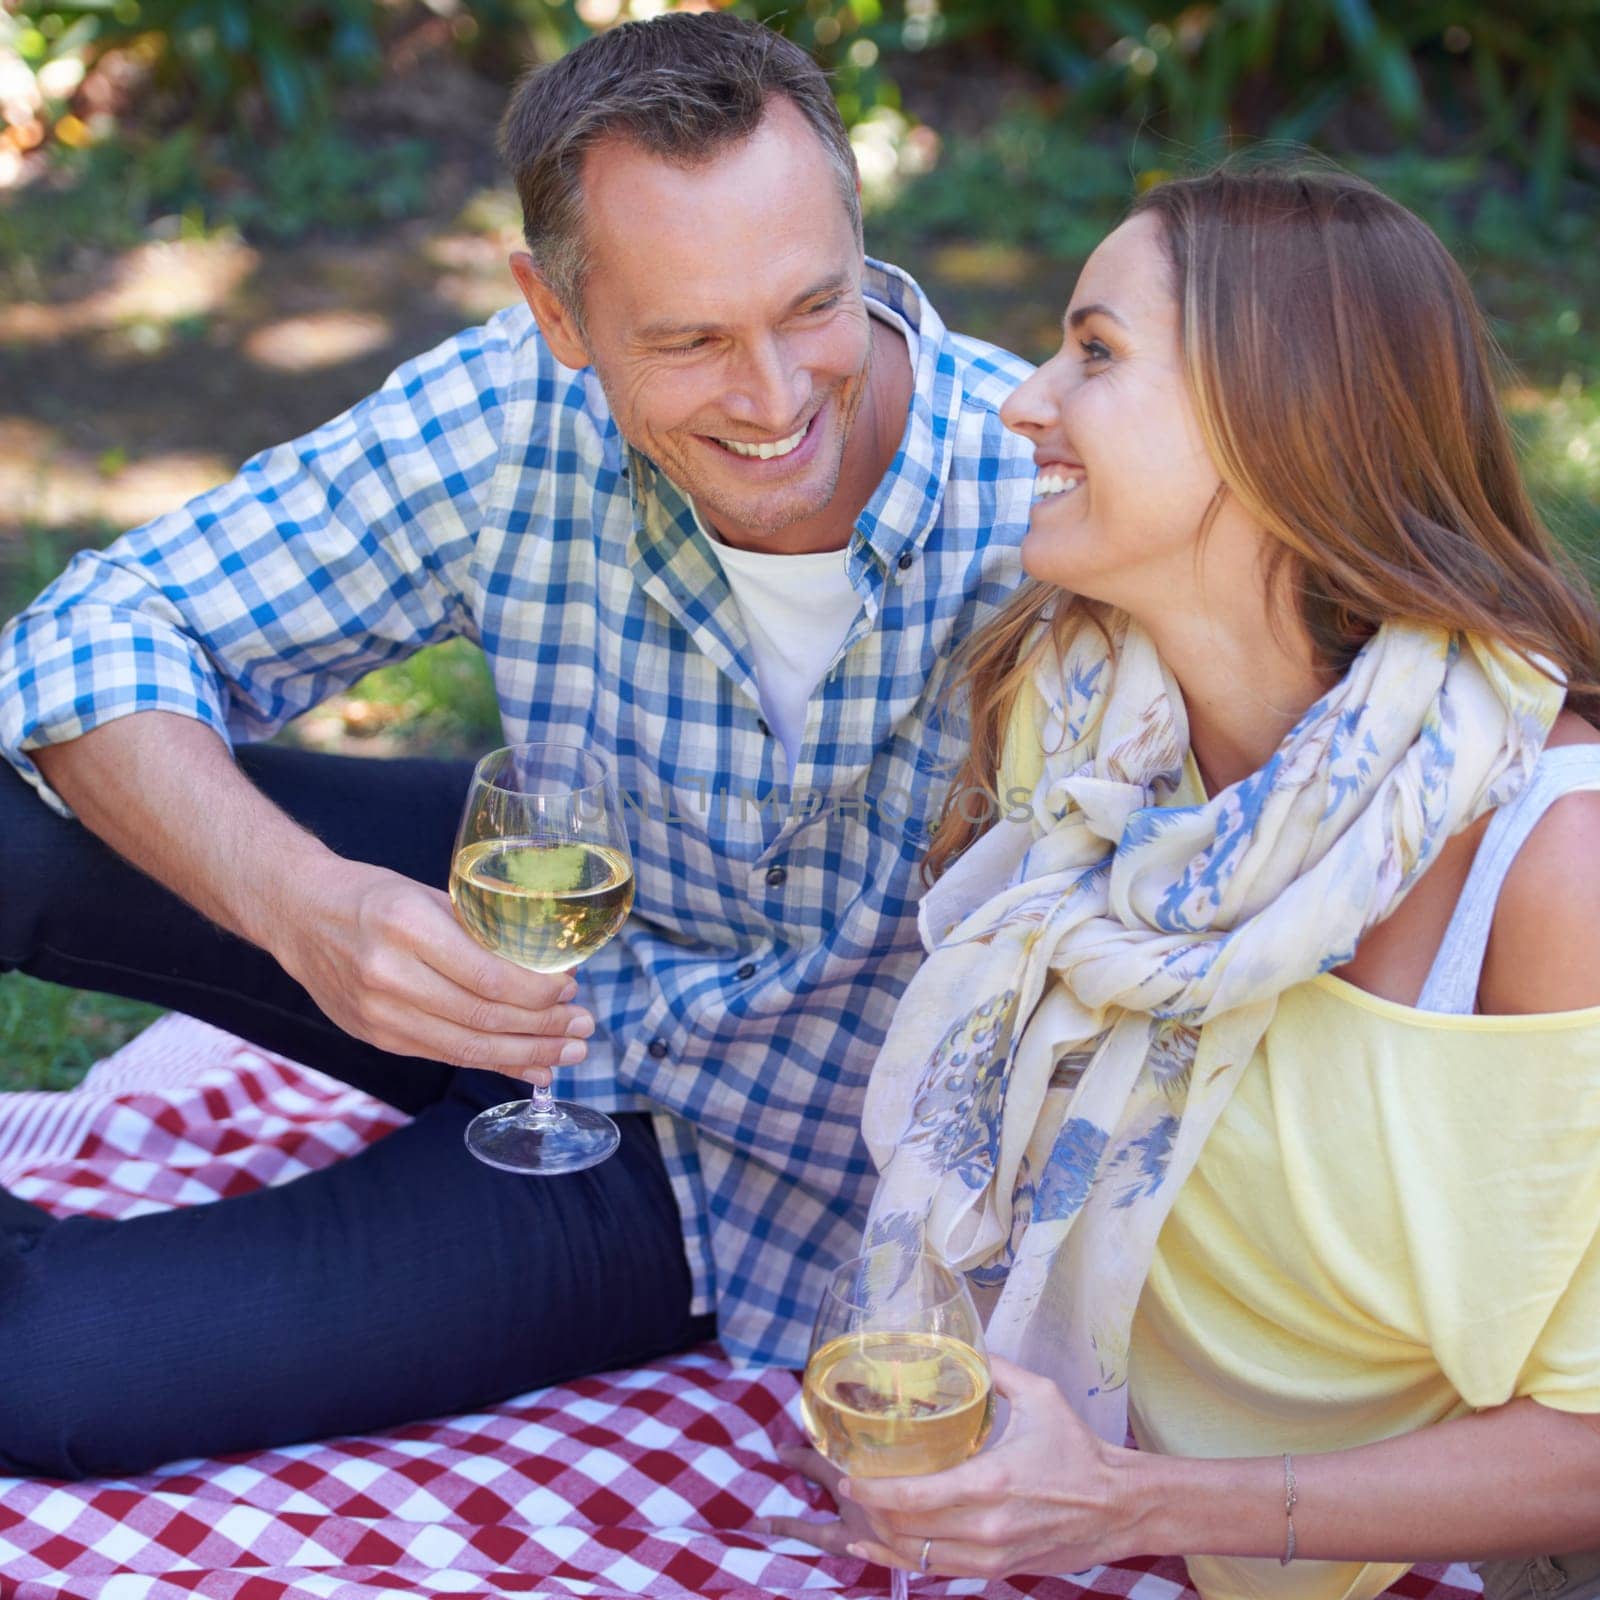 Couple, picnic and wine for bonding in outdoor nature, love and romance in relationship on weekend. Alcohol, conversation and people on date in countryside, adventure and forest for happy on vacation.